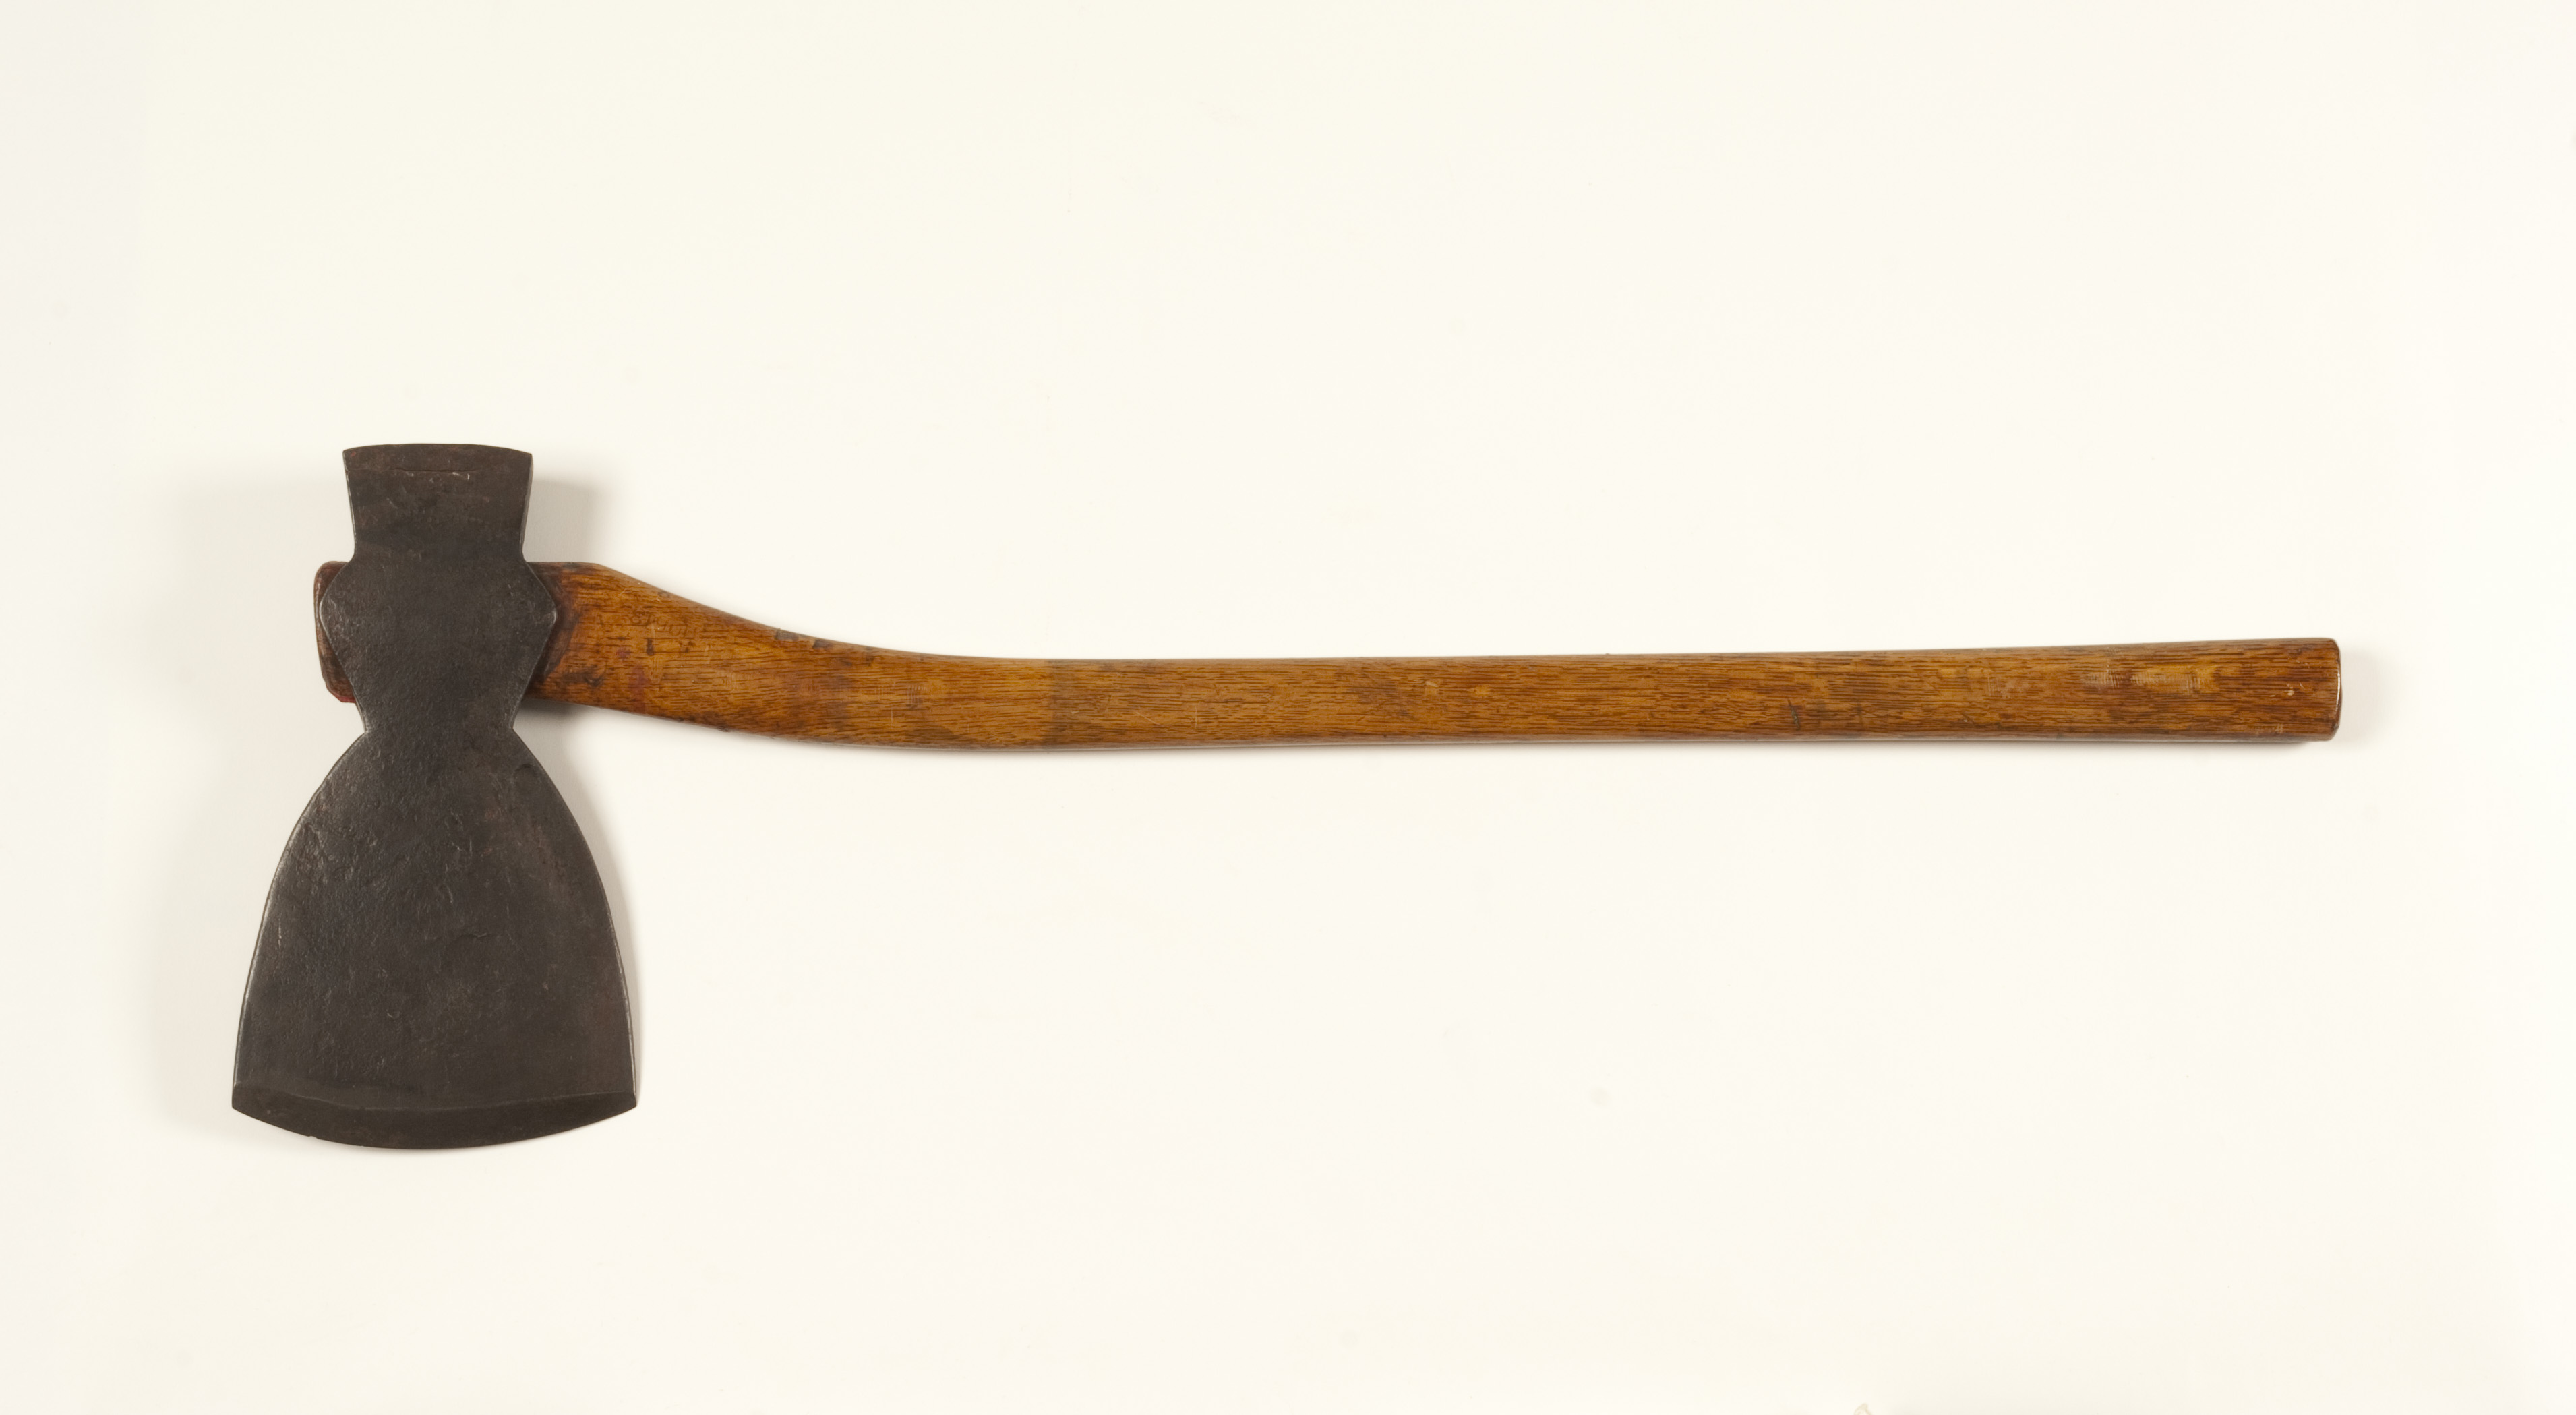 Side axe belonging to Jacob Sibley, late 18th century. [USS Constitution Museum Collection. 495.1]